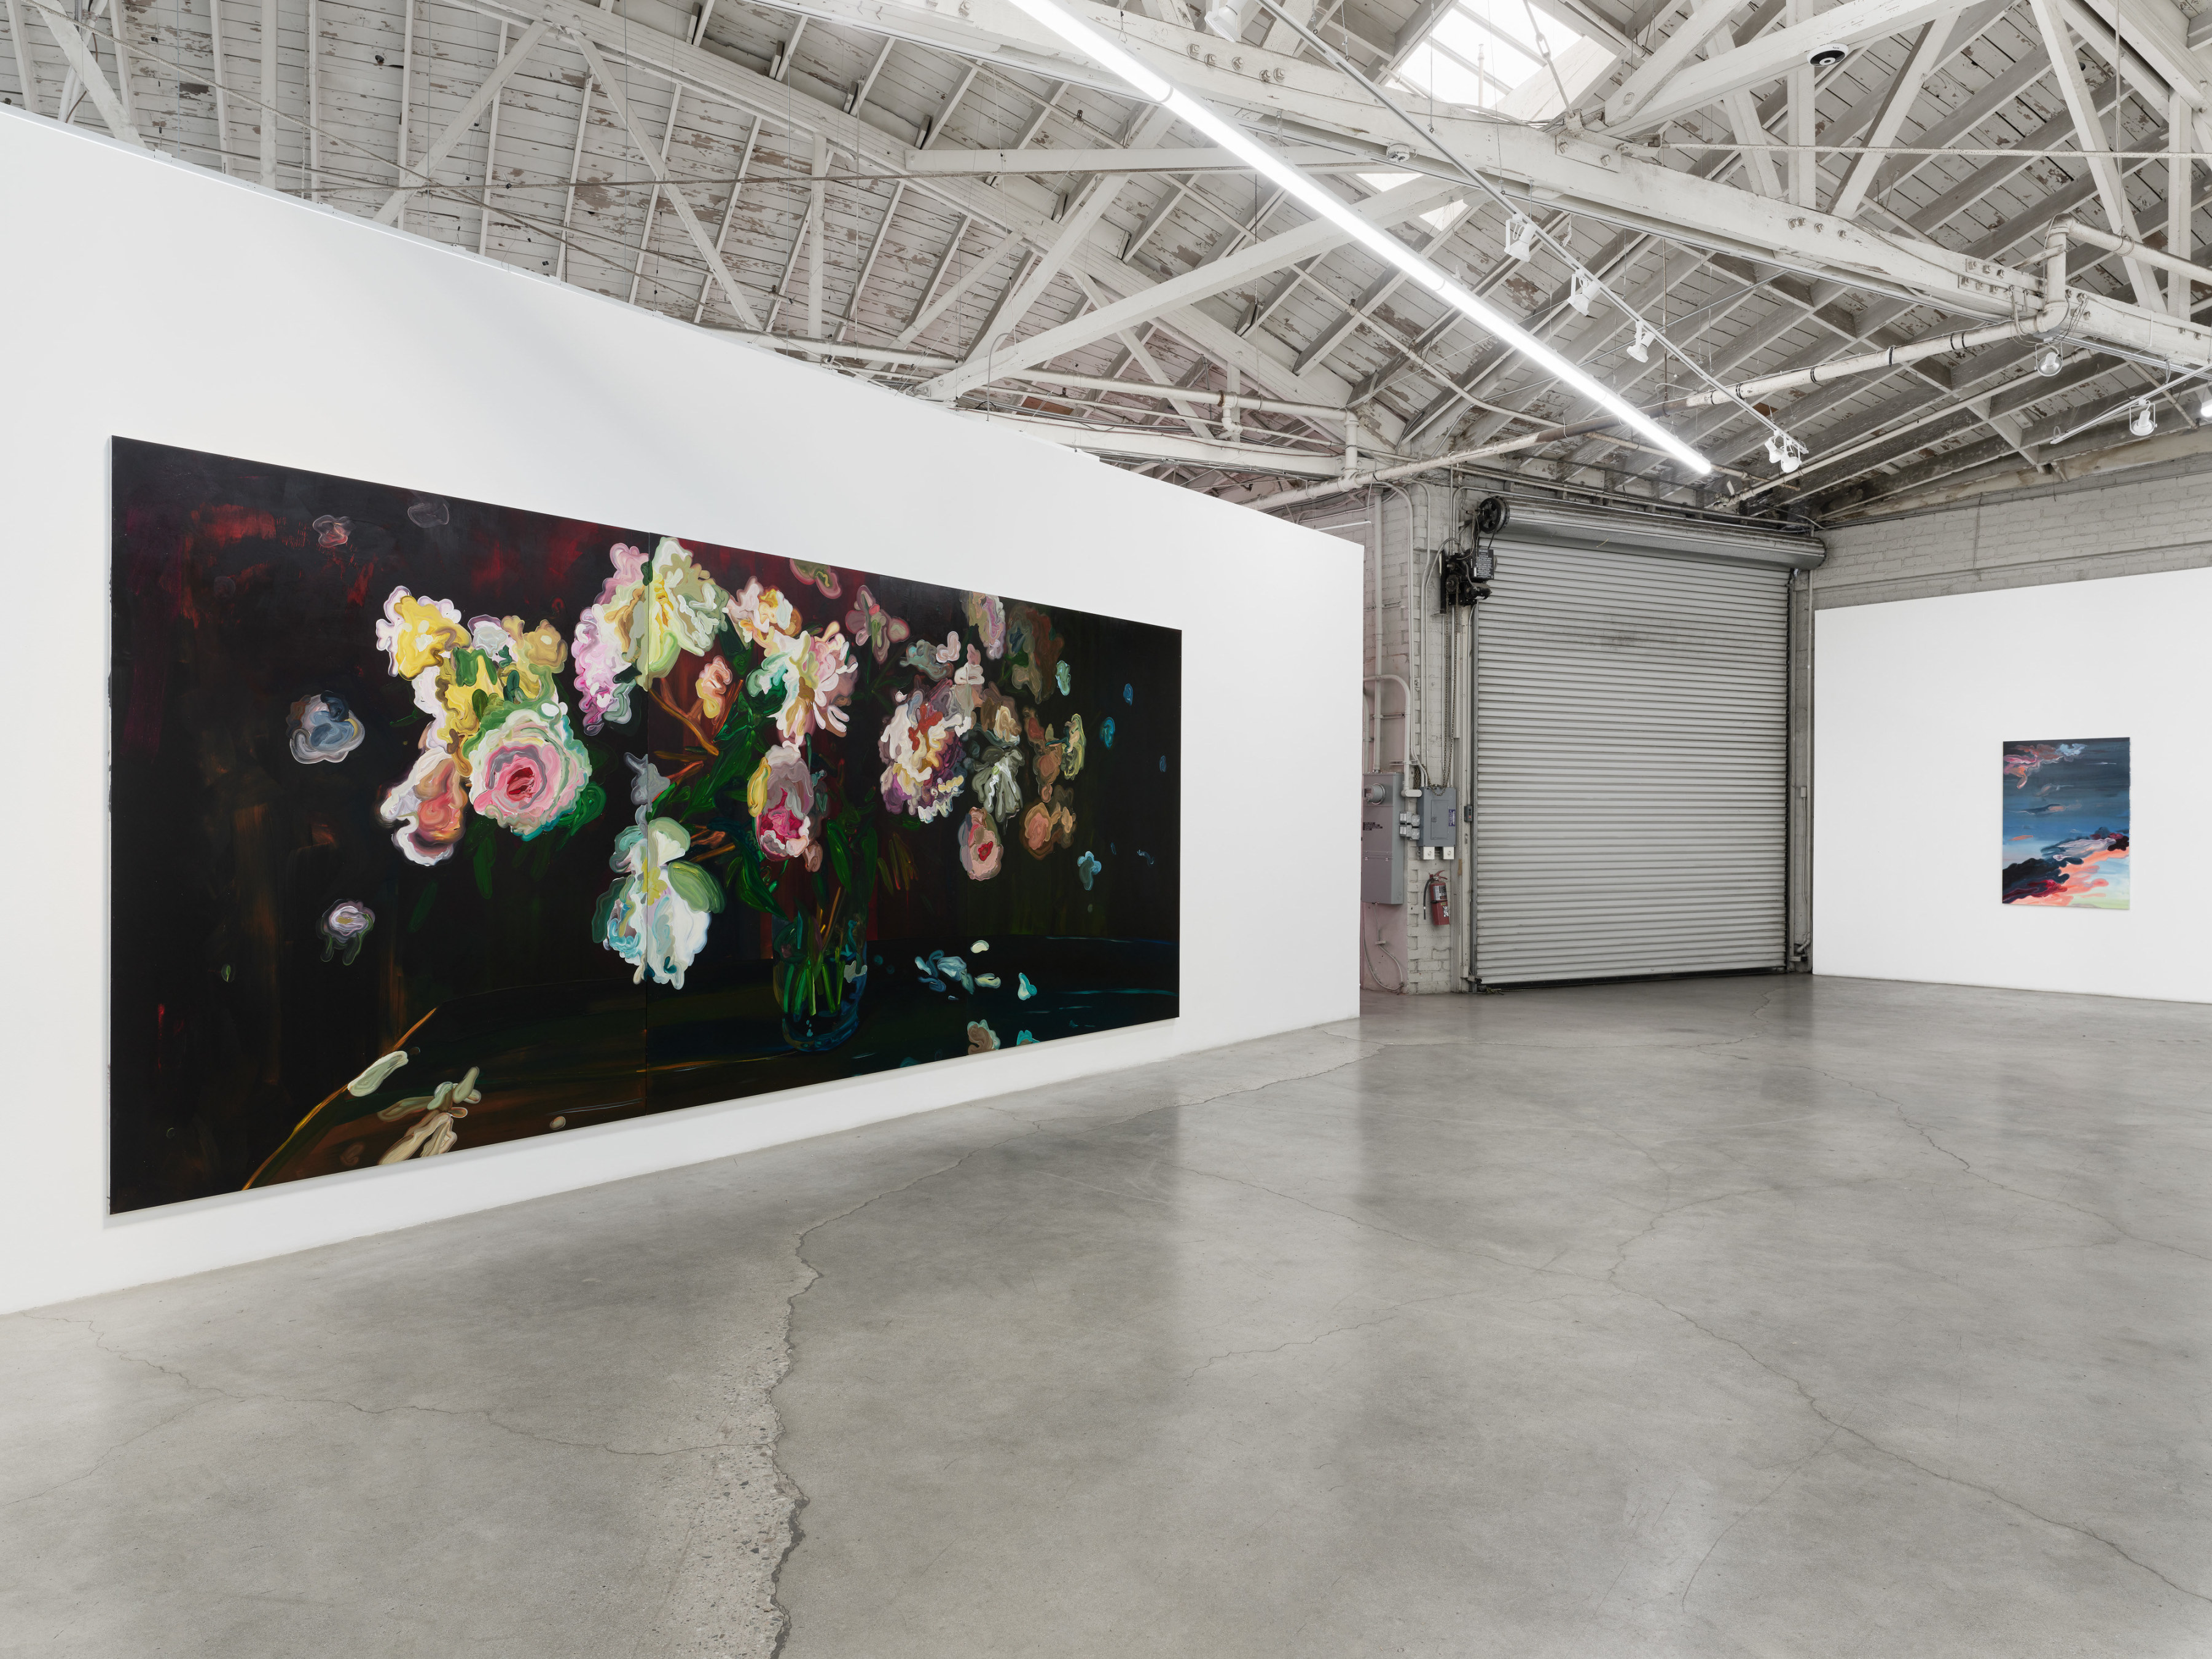 Clare Woods, After Limbo, installation view, 2022